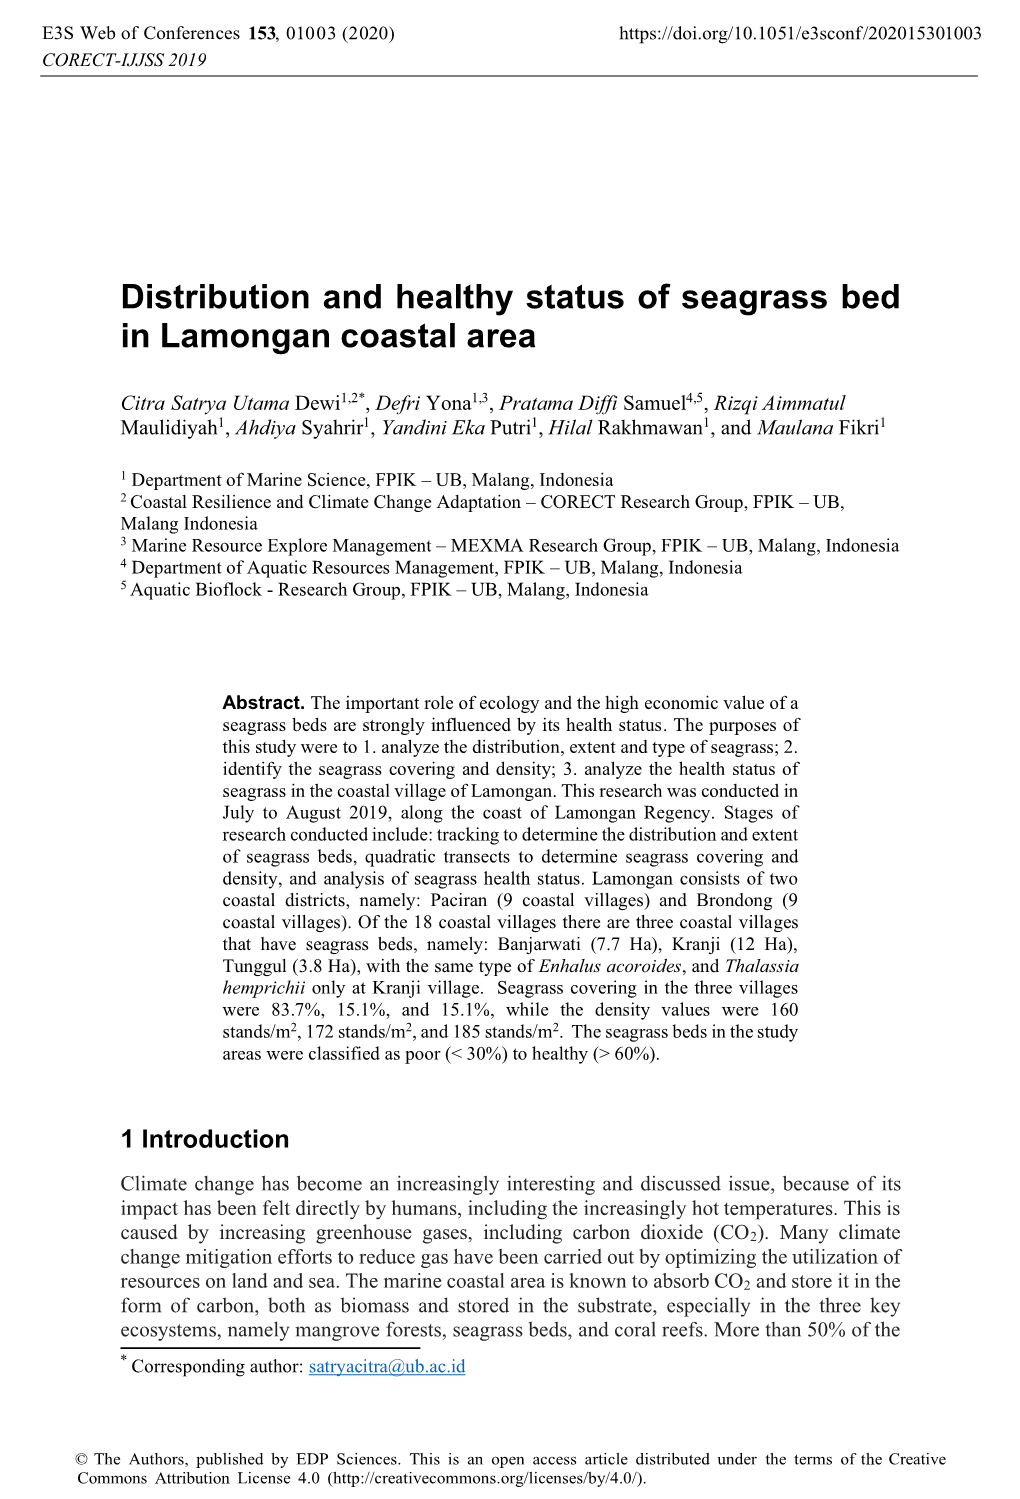 Distribution and Healthy Status of Seagrass Bed in Lamongan Coastal Area